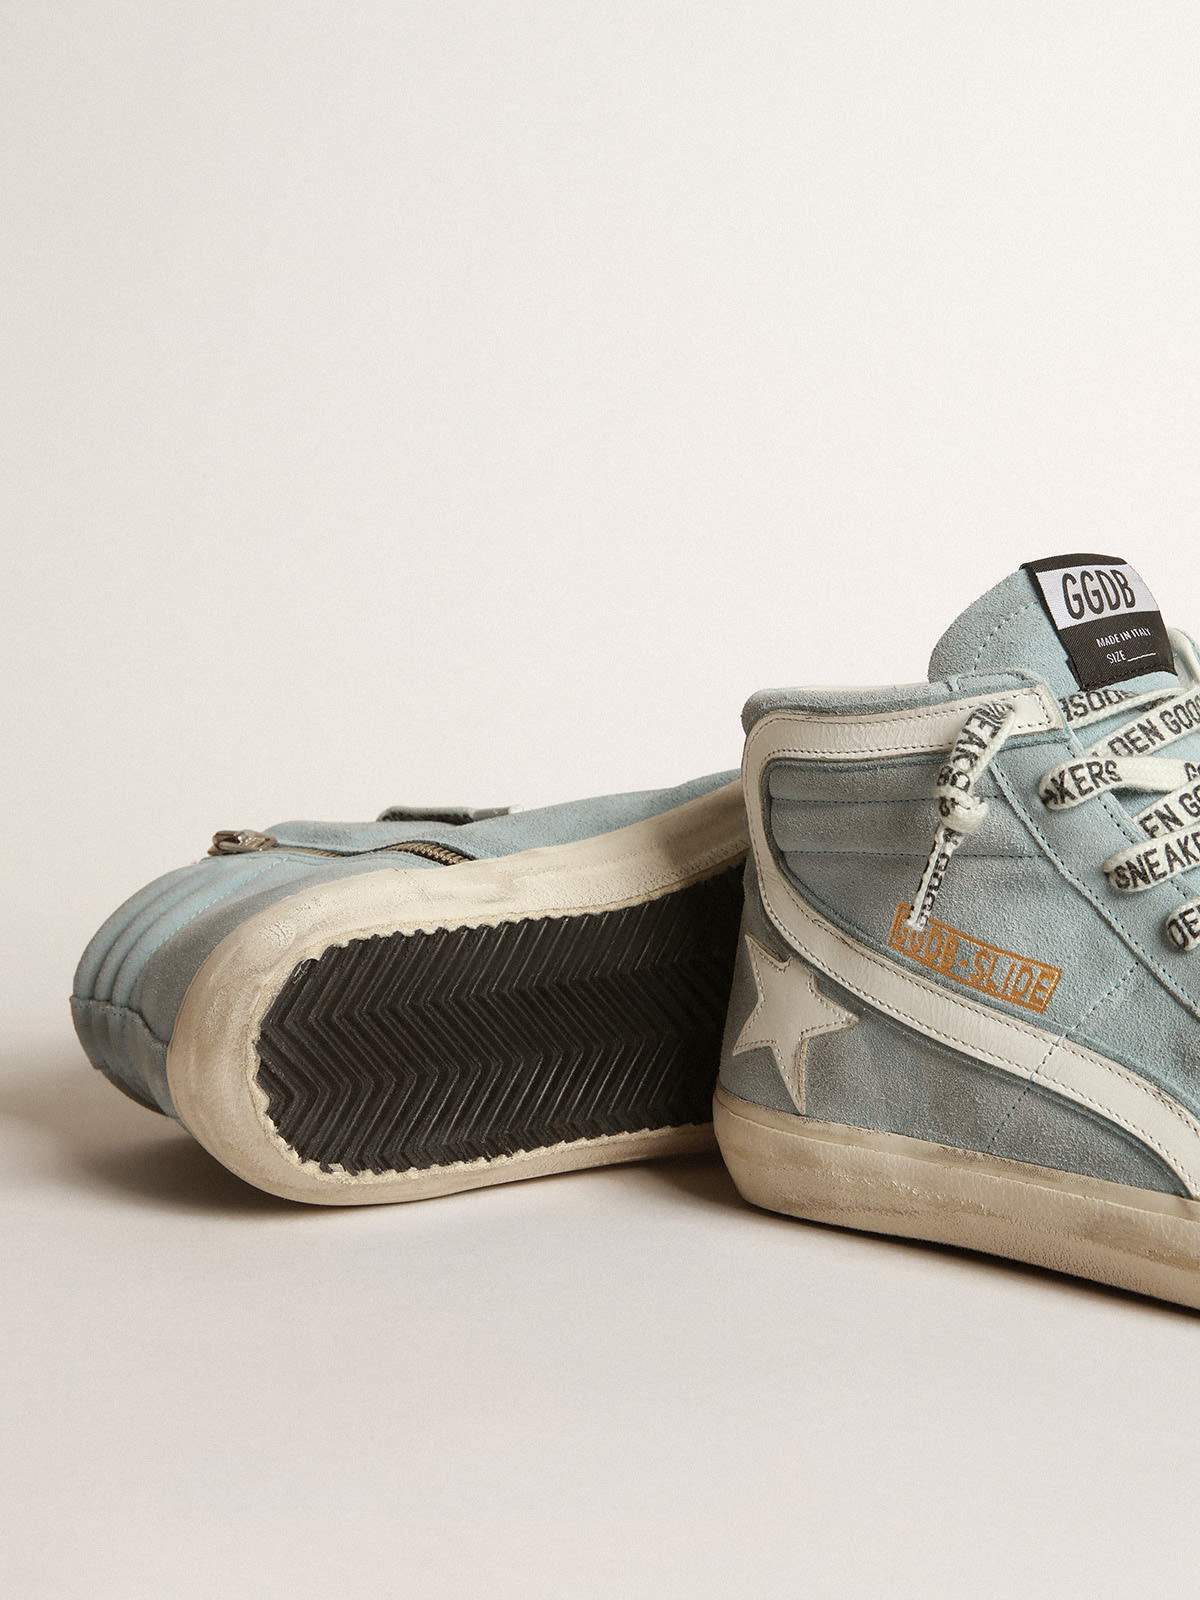 Golden Goose - Slide sneakers in suede with leather star in 